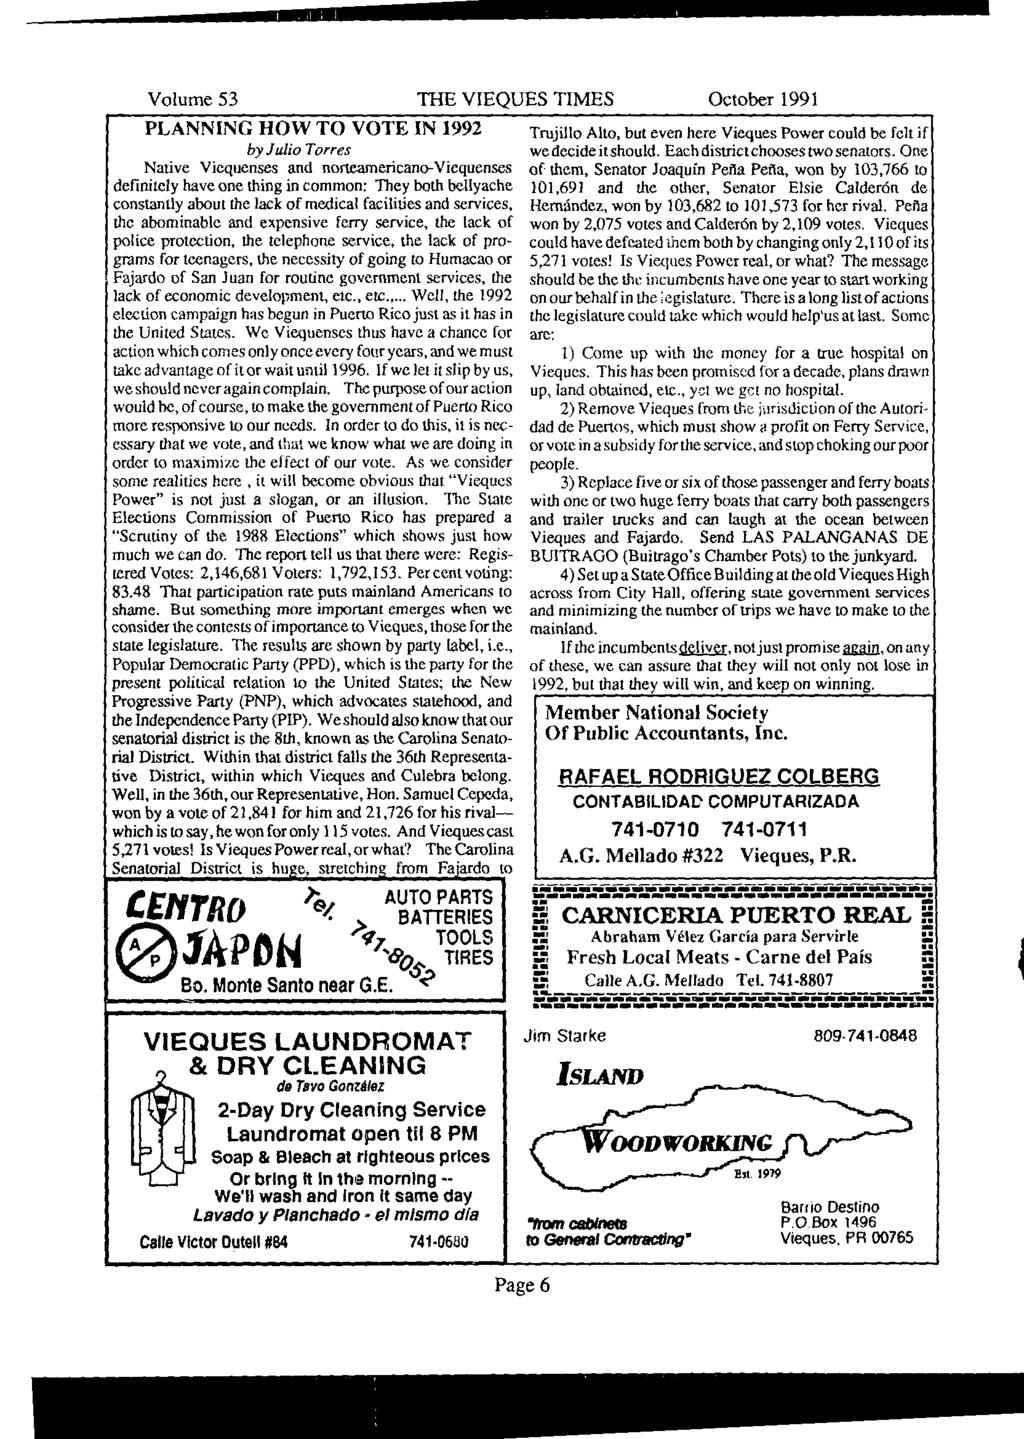 Volume 53 THE VIEQUES TIMES October 1991 PLANNING HOW TO VOTE IN 1992 by Julio Torres Native Viequenses and norteamericano-viequenses definitely have one thing in common: They beth bellyache